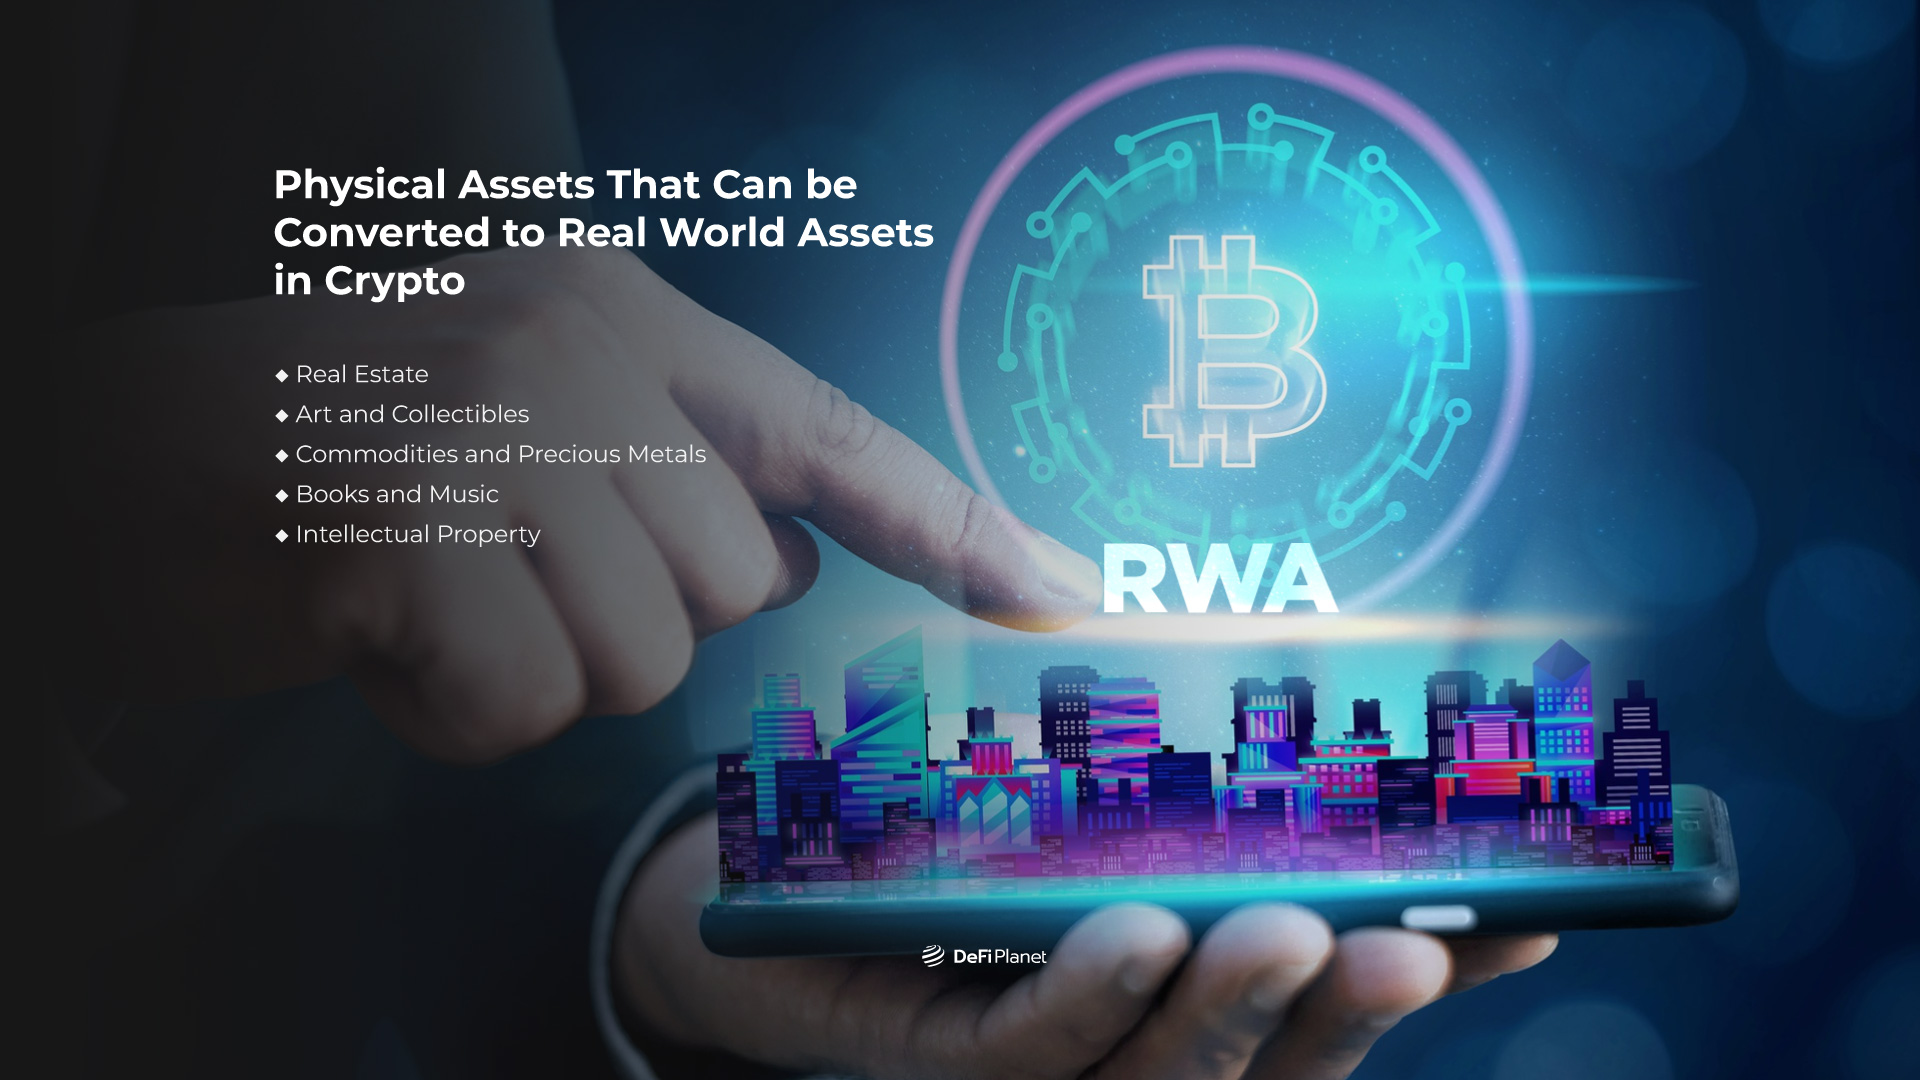 Physical Assets That Can Converted to Real World Assets (RWAs) in Crypto
